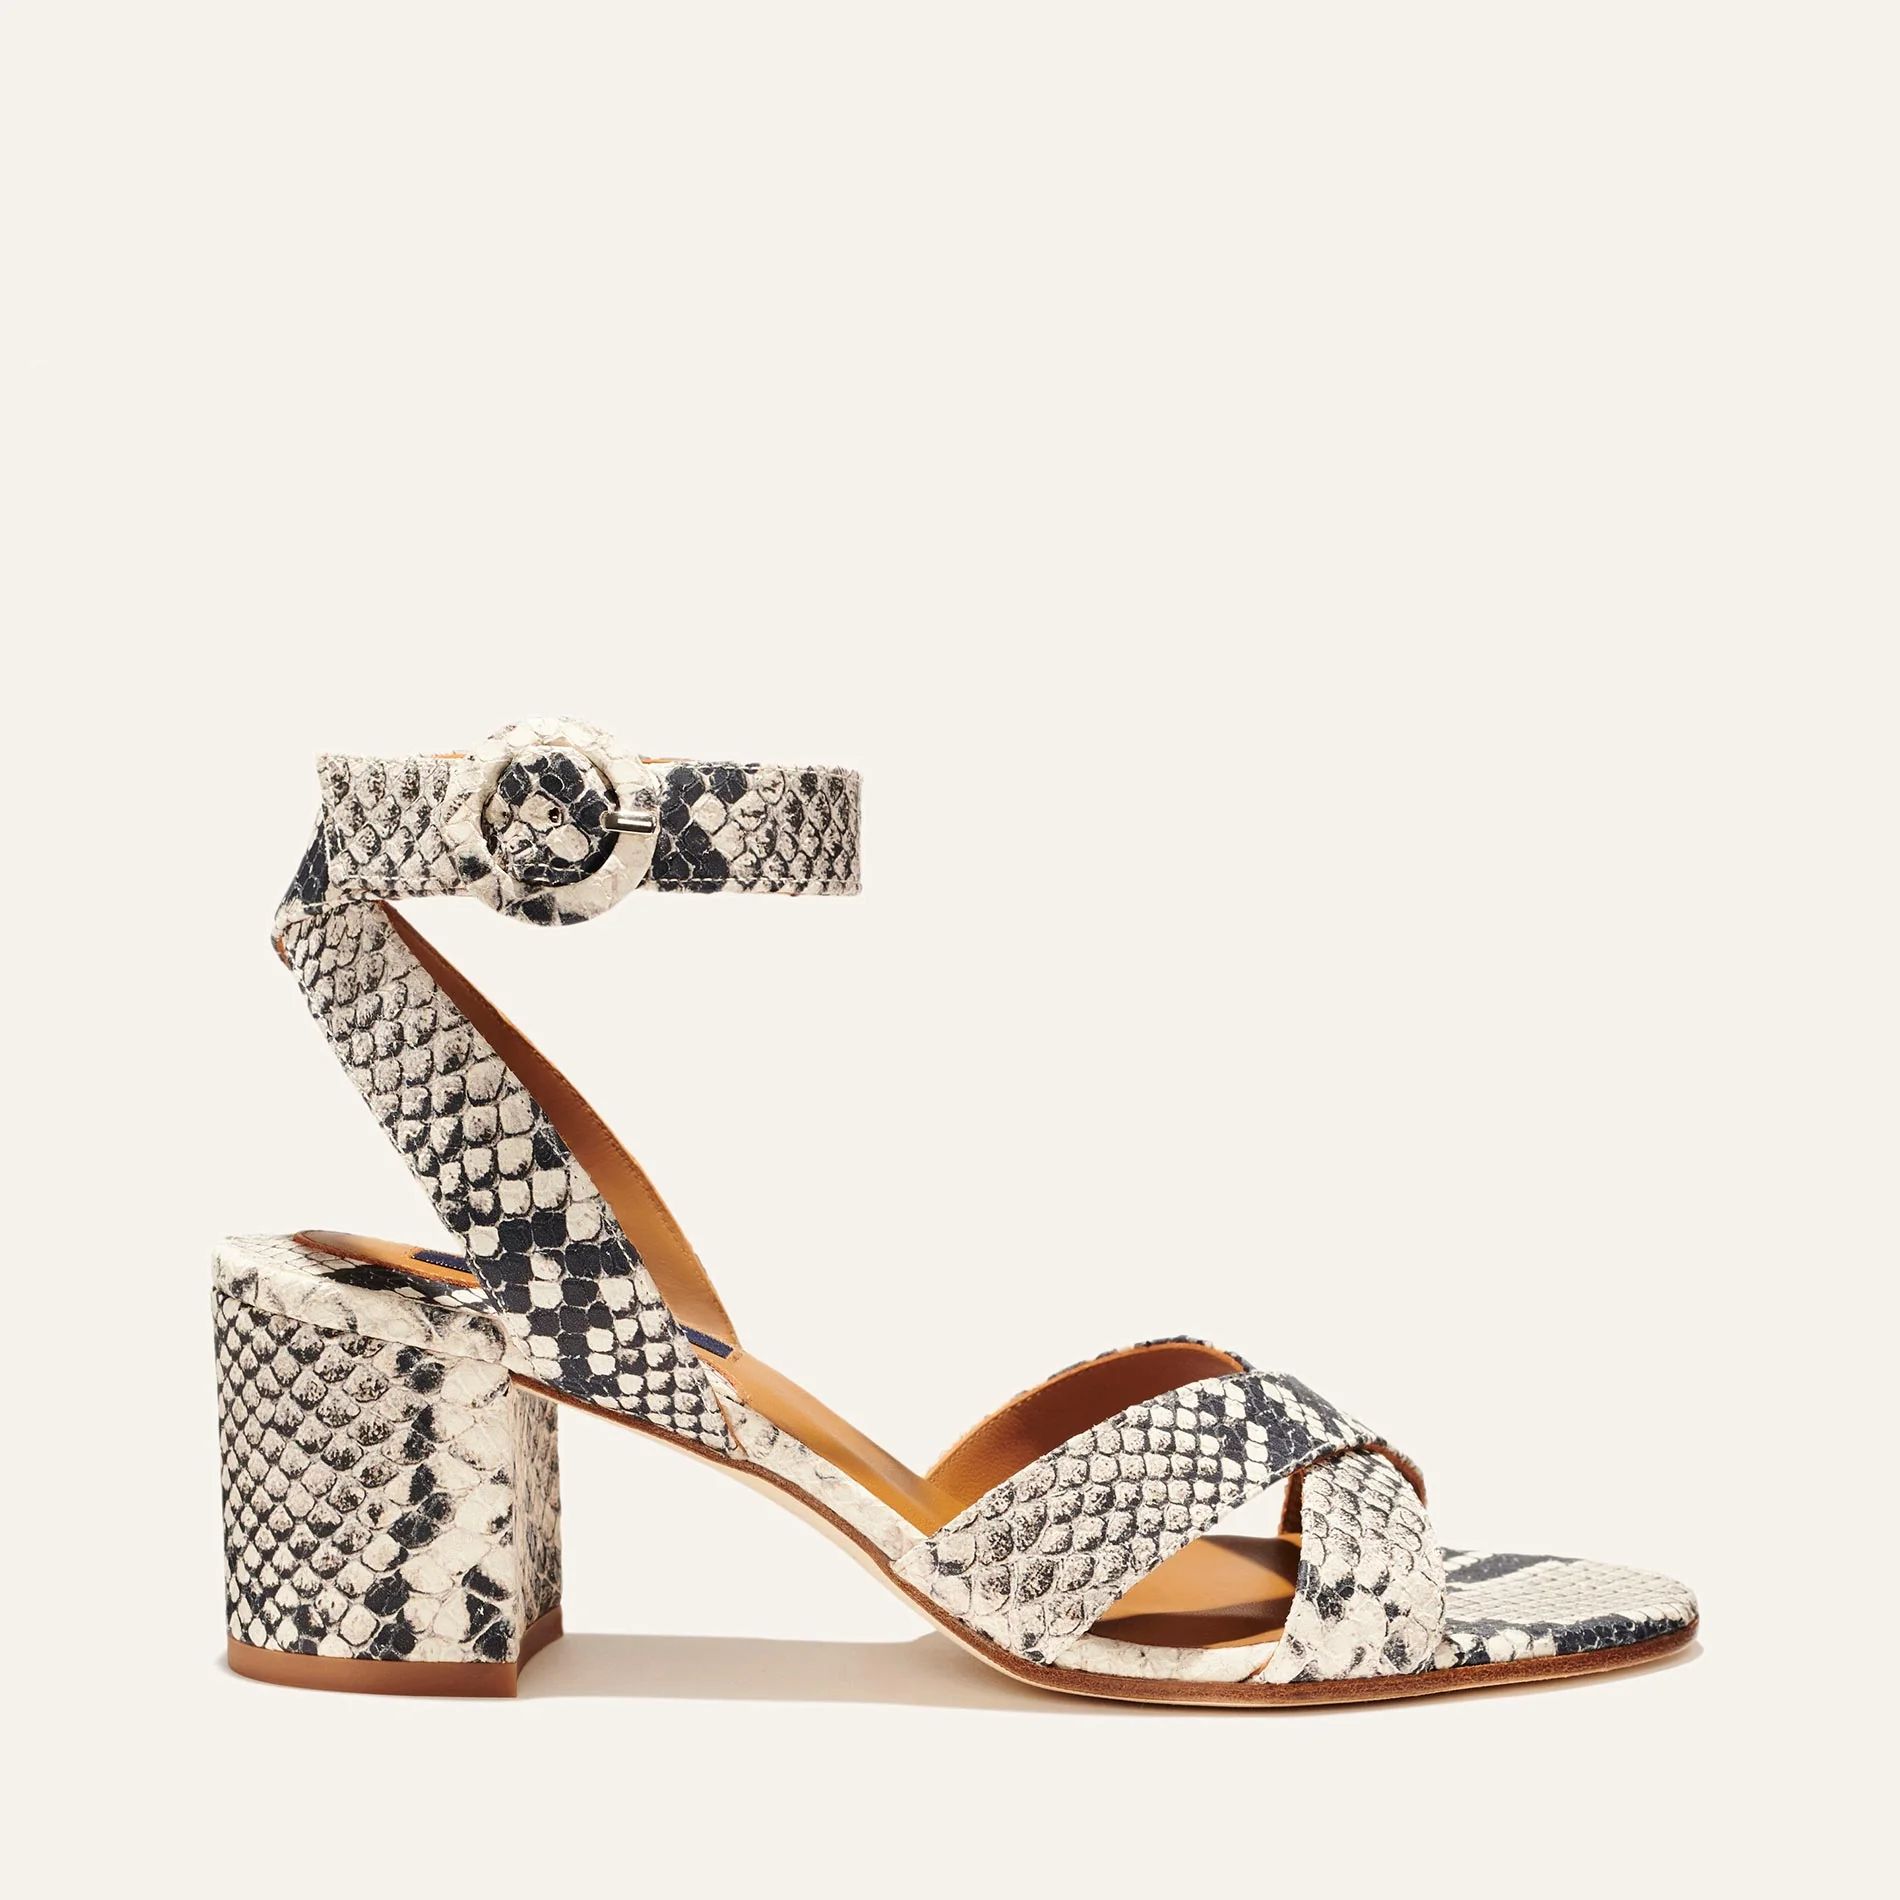 The City Sandal - Natural Python Embossed | Margaux